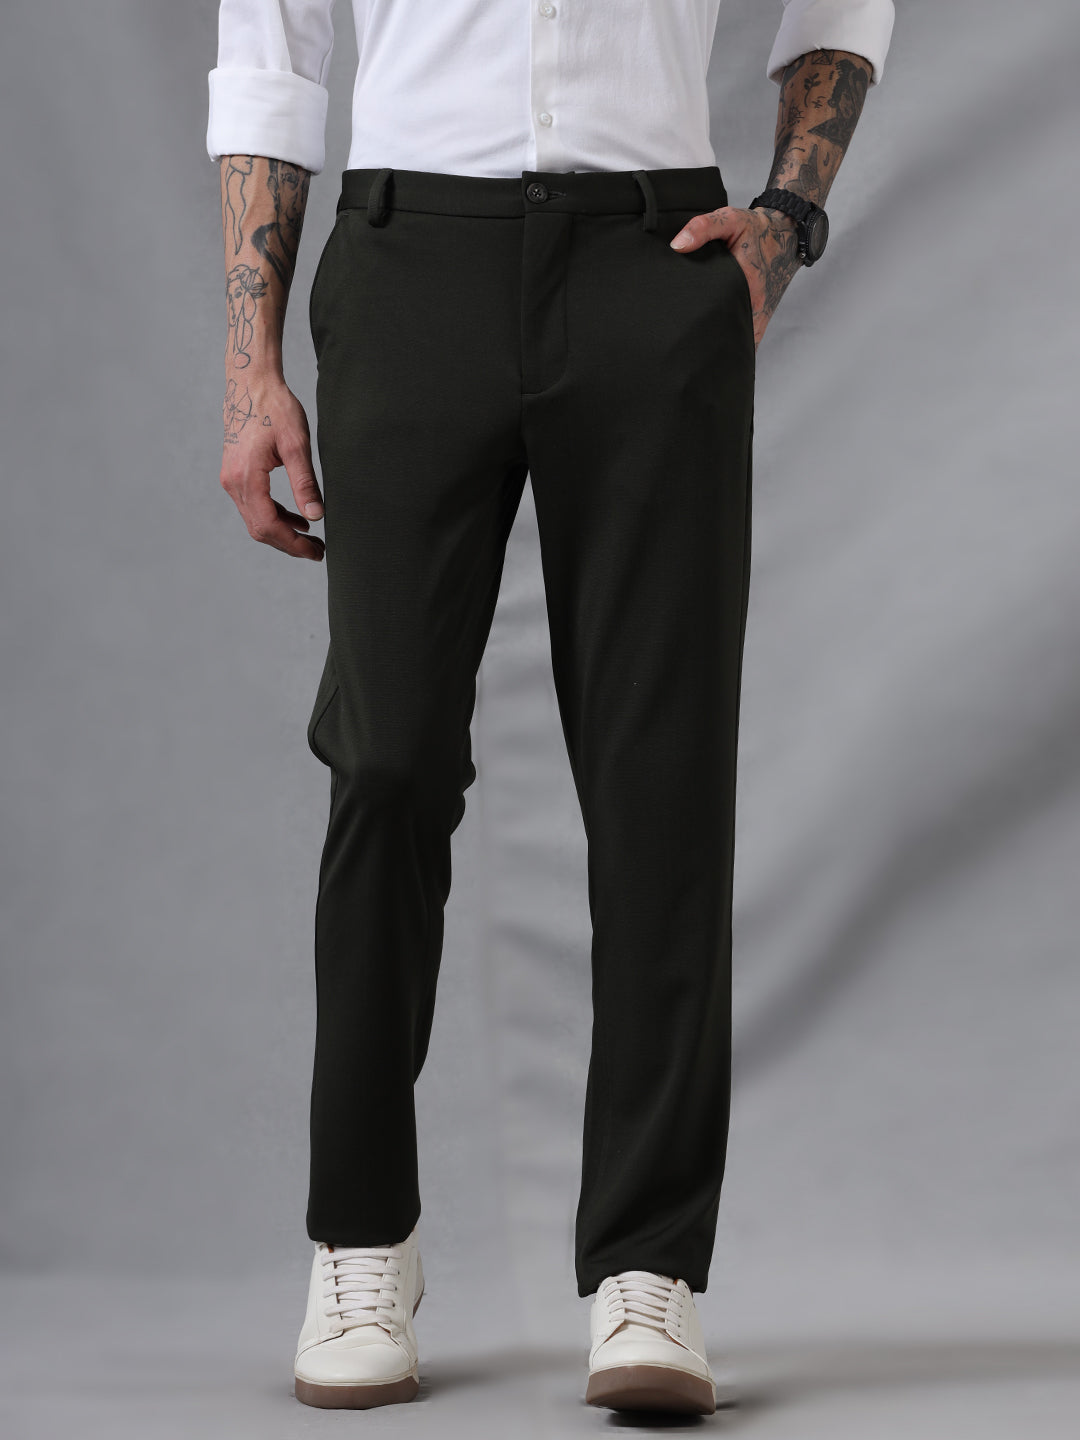 Stainless Steel Black Men's Trouser For Casual Wear And Formal Wear  Occasion, 20-40 Inch at Best Price in Una | Lakshita Garment